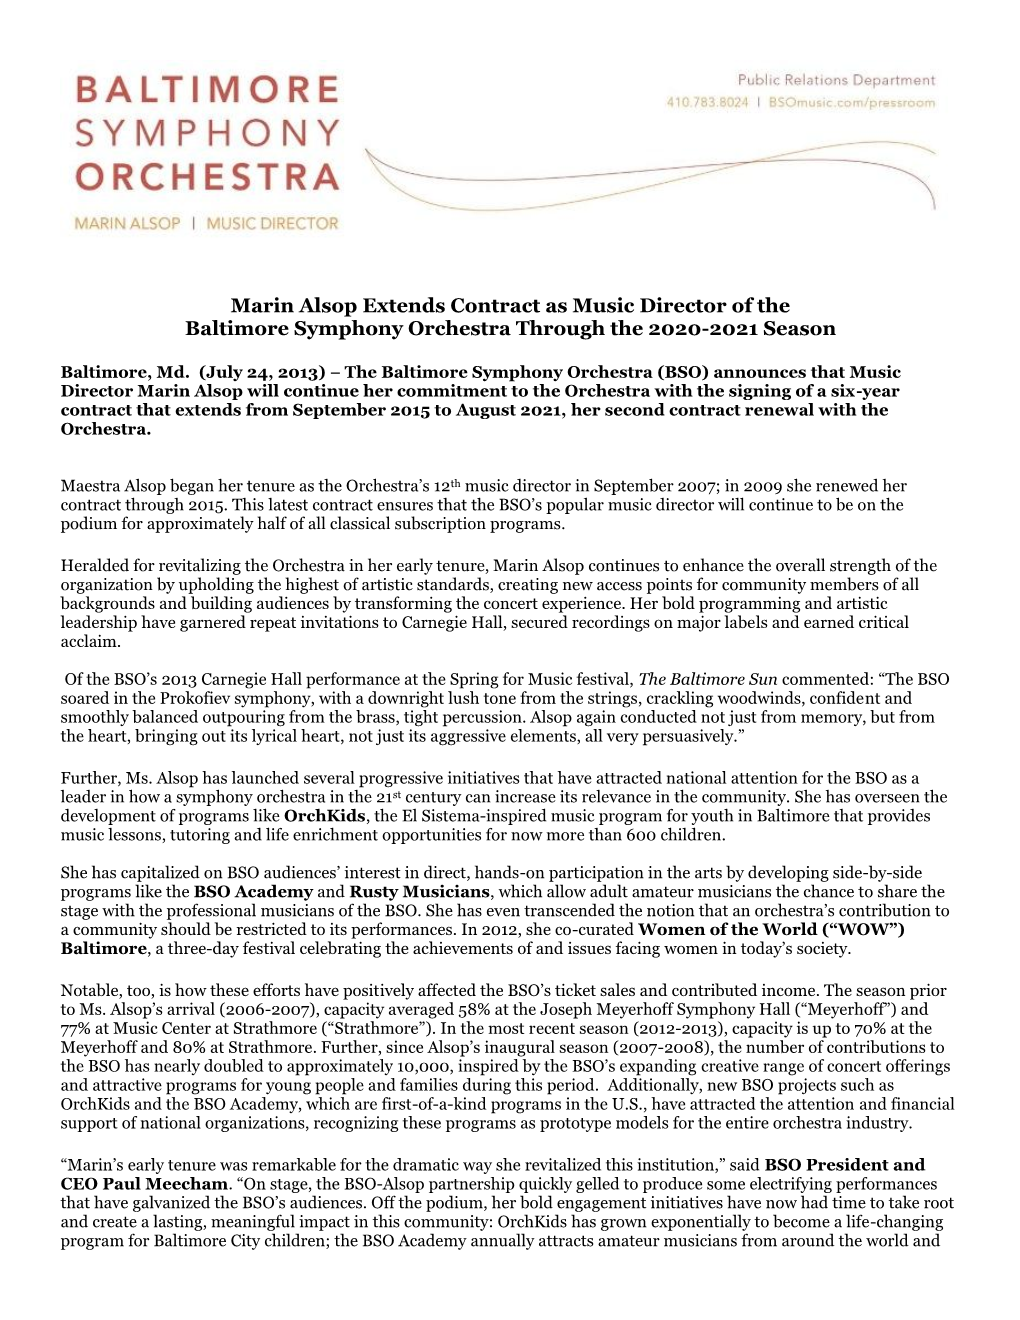 Marin Alsop Extends Contract As Music Director of the Baltimore Symphony Orchestra Through the 2020-2021 Season